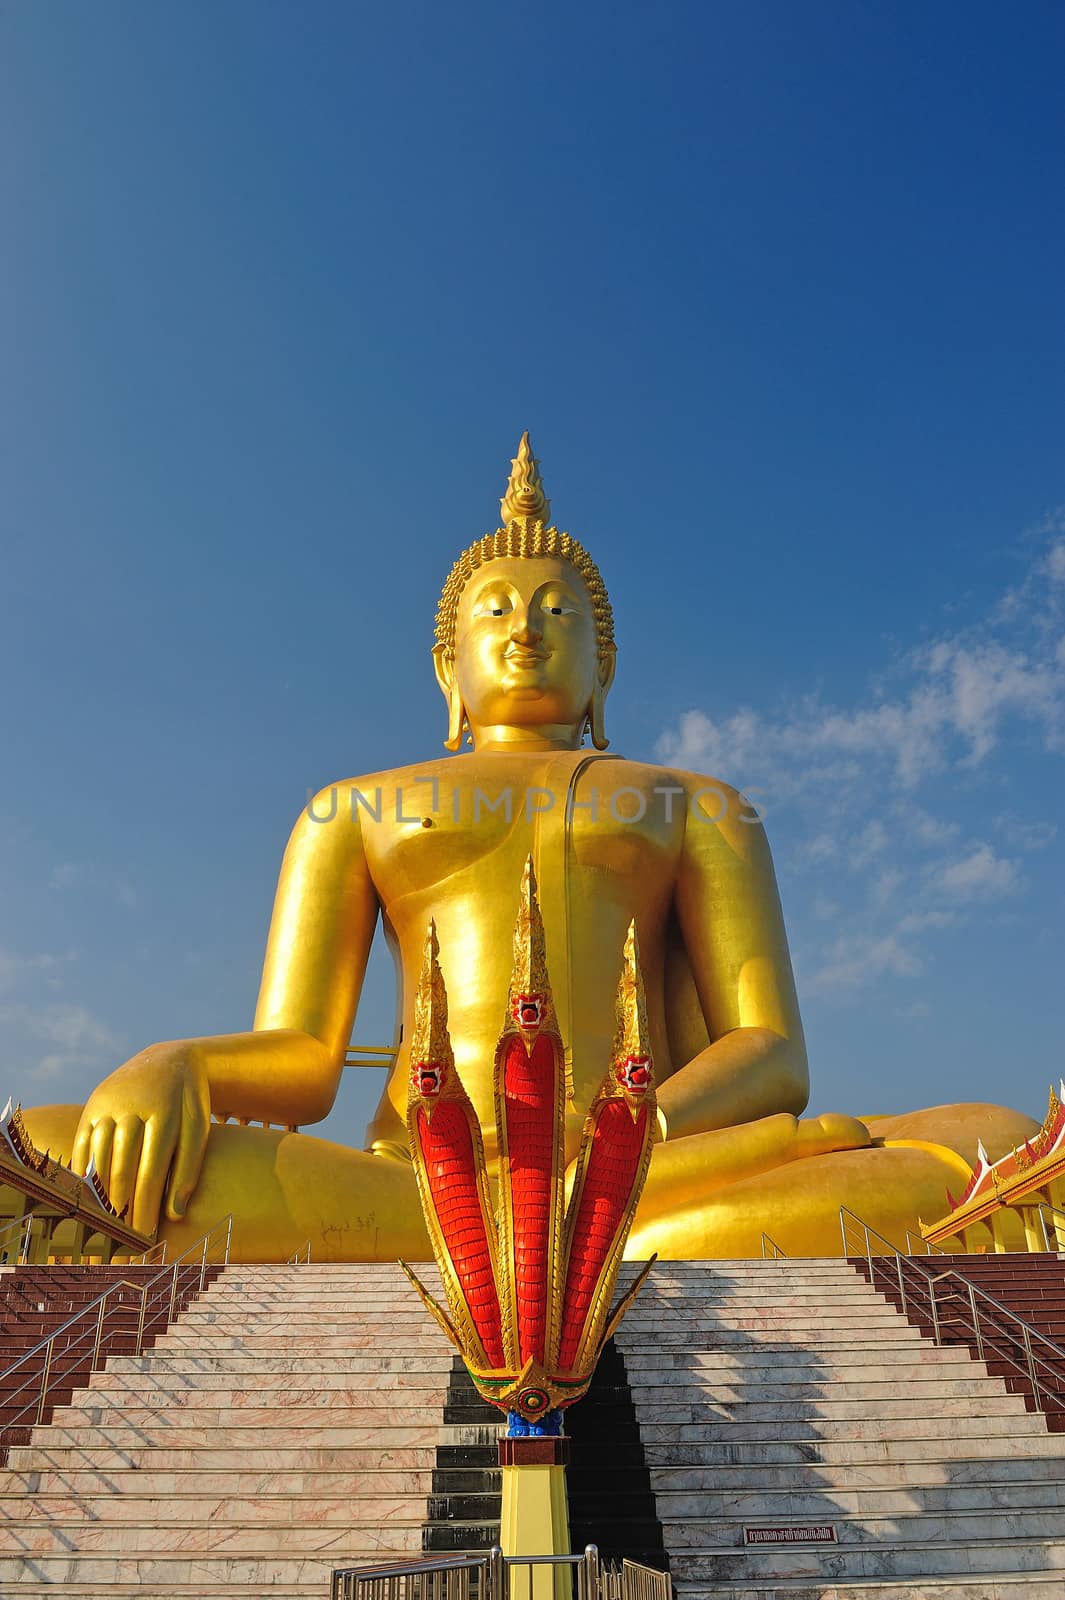 Golden Buddha statue at Wat Muang in Angthong, Thailand by think4photop